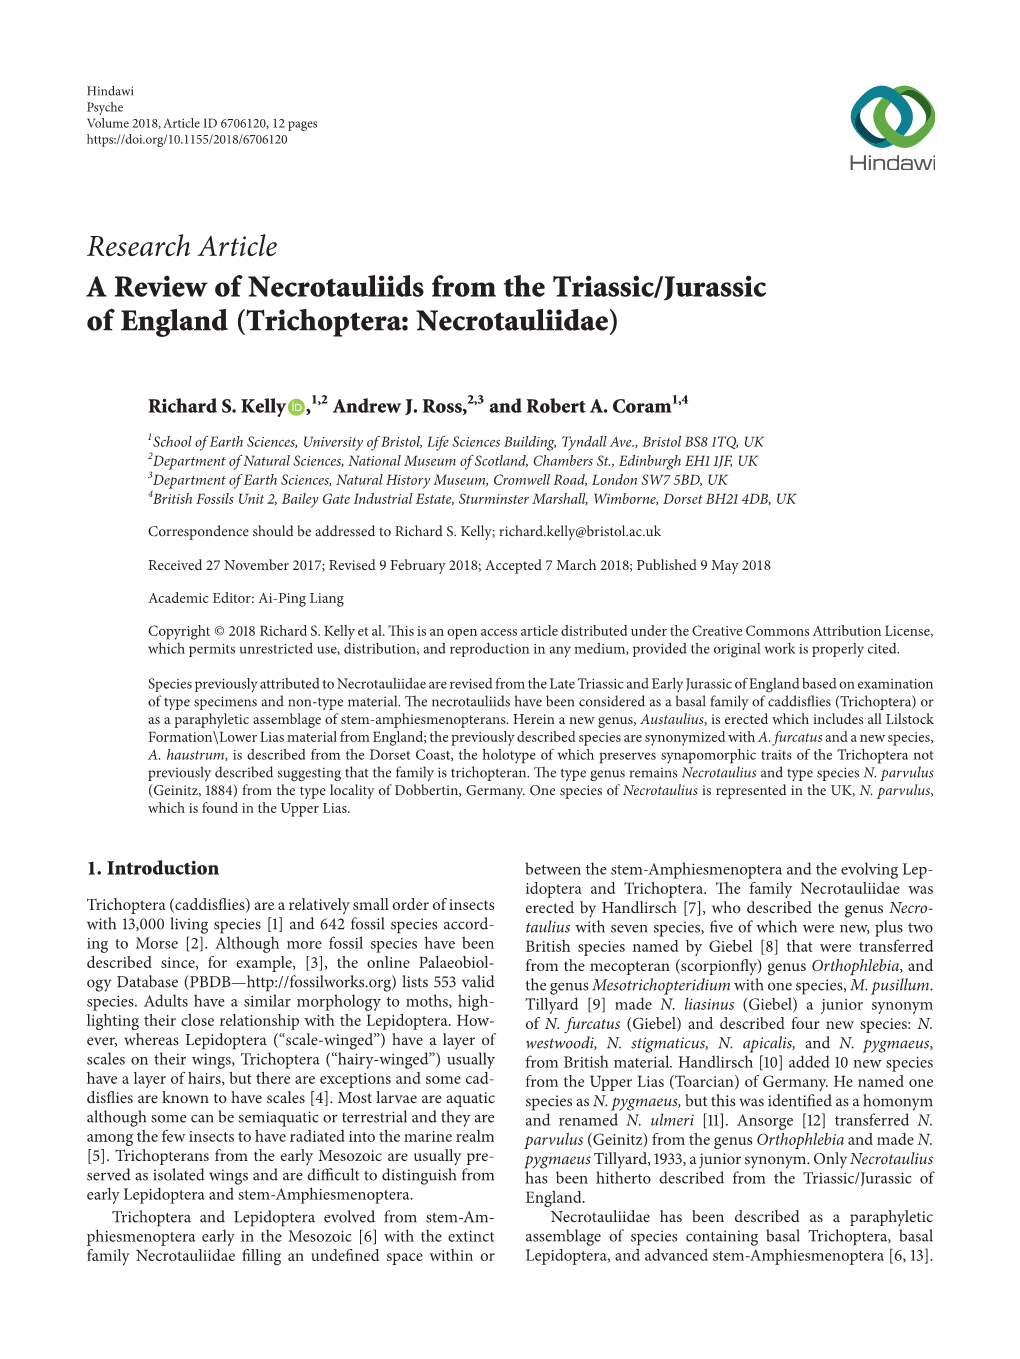 A Review of Necrotauliids from the Triassic/Jurassic of England (Trichoptera: Necrotauliidae)